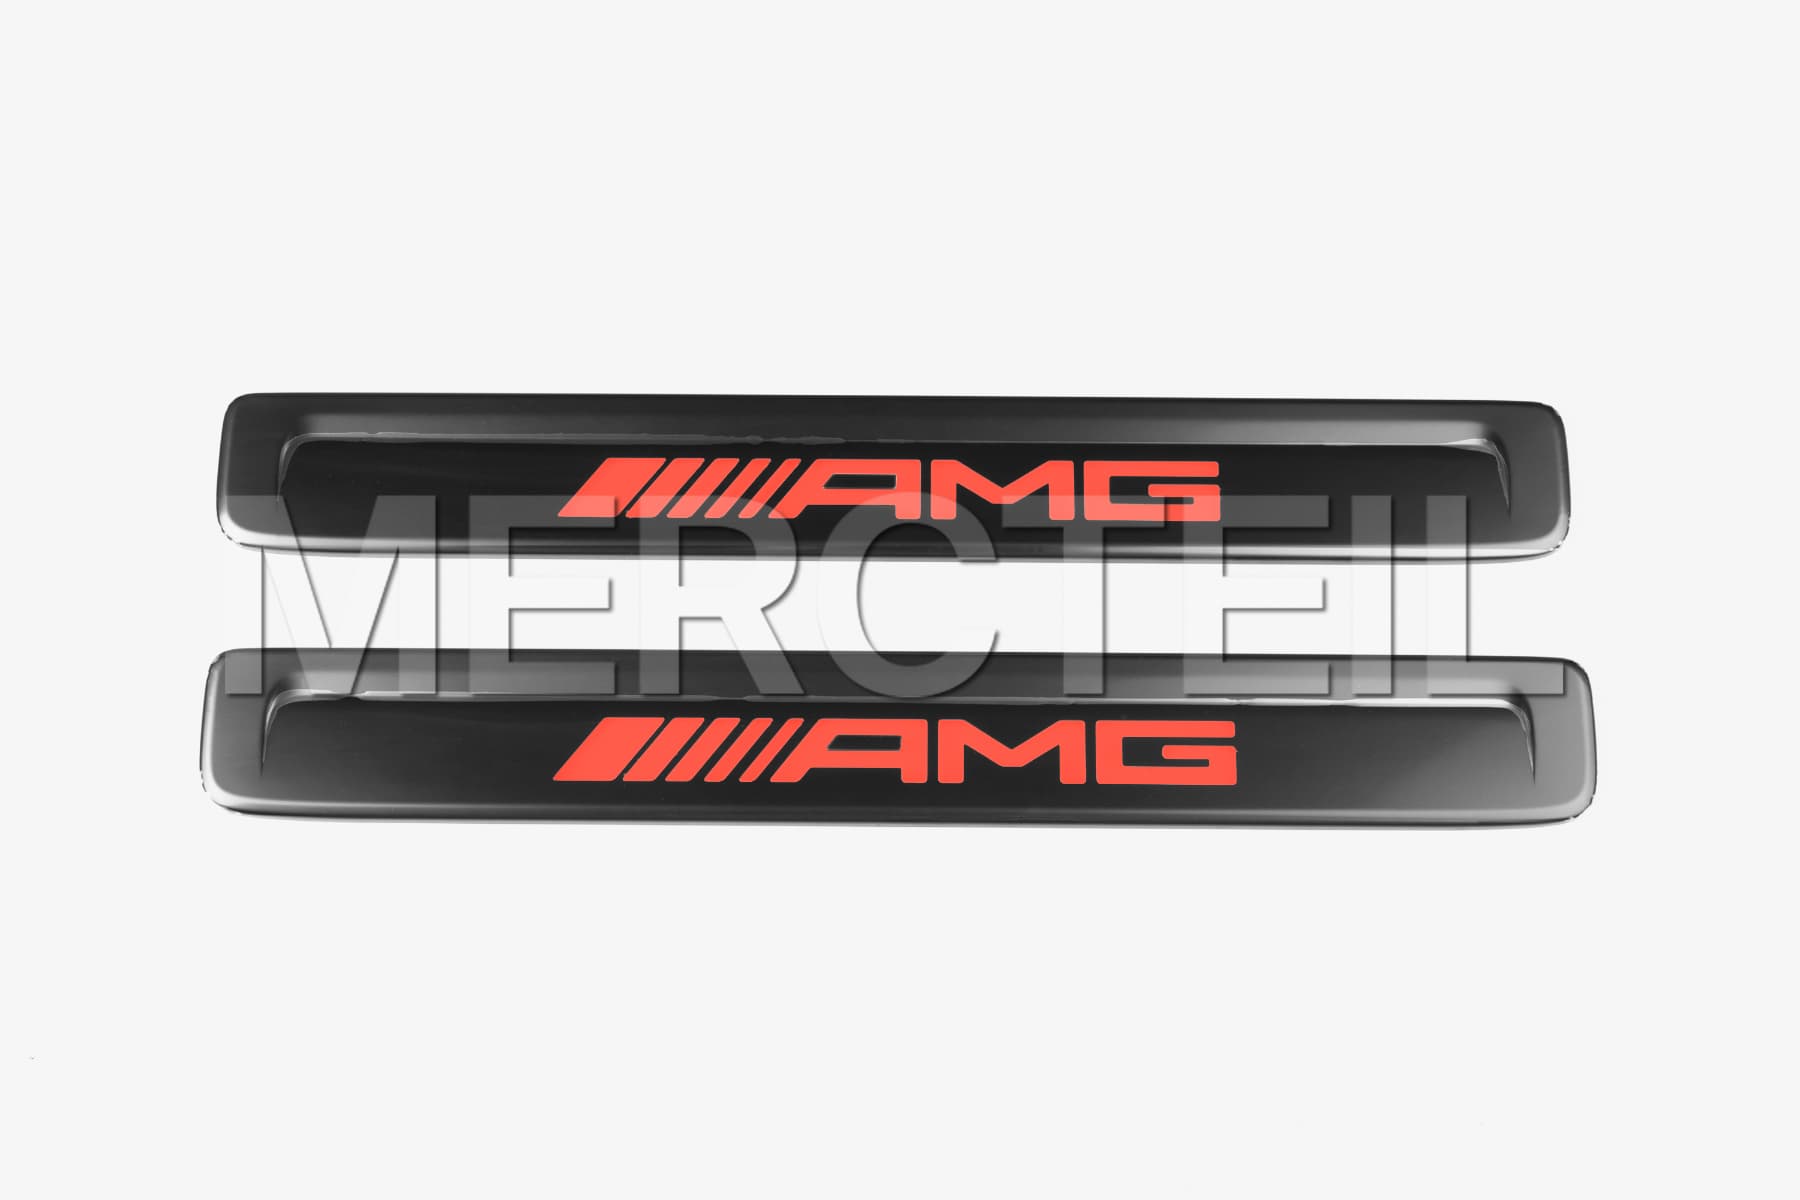 EQE / EQS Exchangeable AMG Black Red Covers for Illuminated Door Sills Code U45 X294 V295 V297 Genuine Mercedes-AMG (Part number: A2976804508)